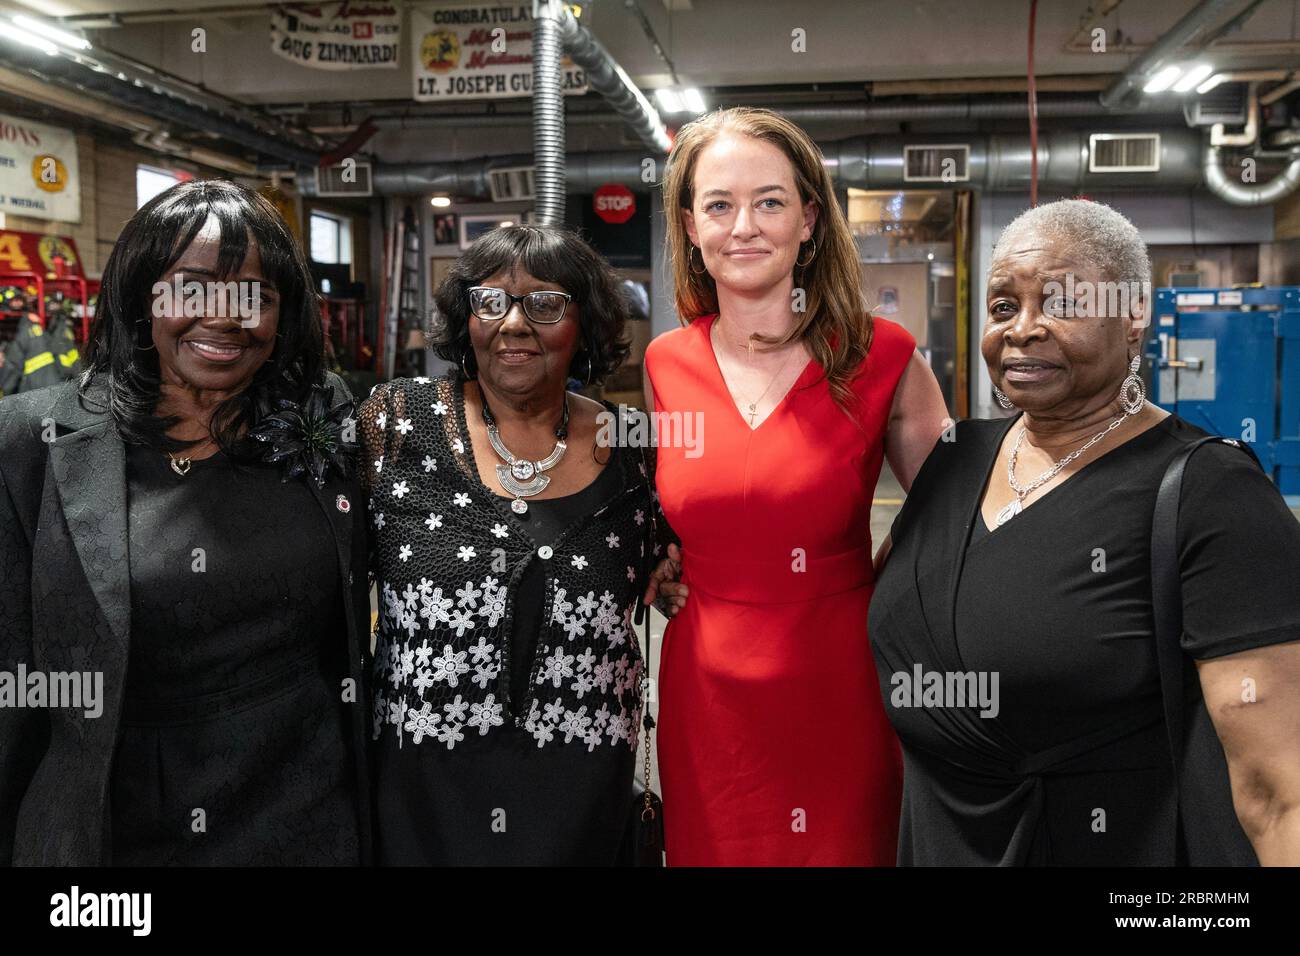 Gwendolyn Webb, Gwendolyn Gamble, Laura Kavanagh, Gloria Washington attend press conference on anniversary of Children's Crusade or Children's March as it is known at FDNY Engine 1, Ladder 24 station in New York on July 10, 2023 Stock Photo